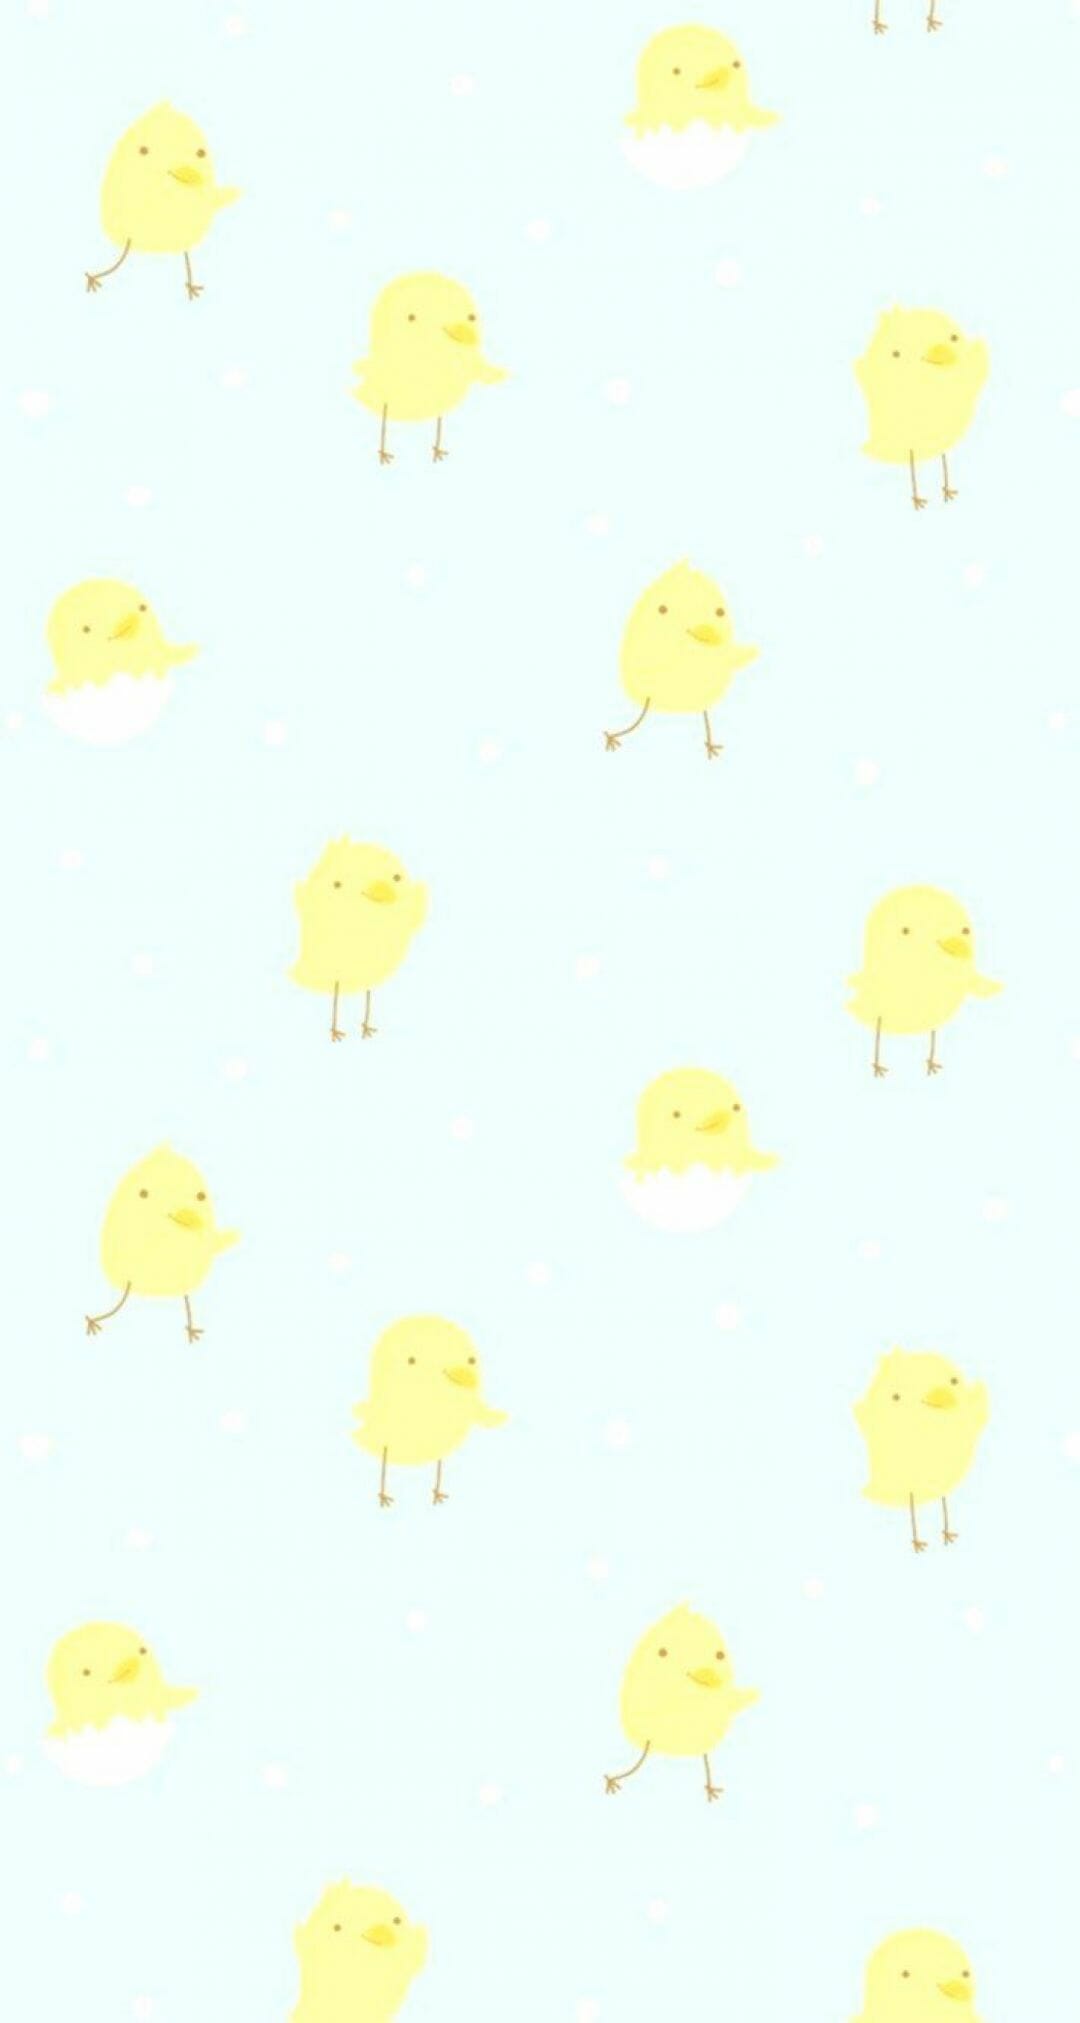 IPhone wallpaper with yellow chickens on a blue background - Easter